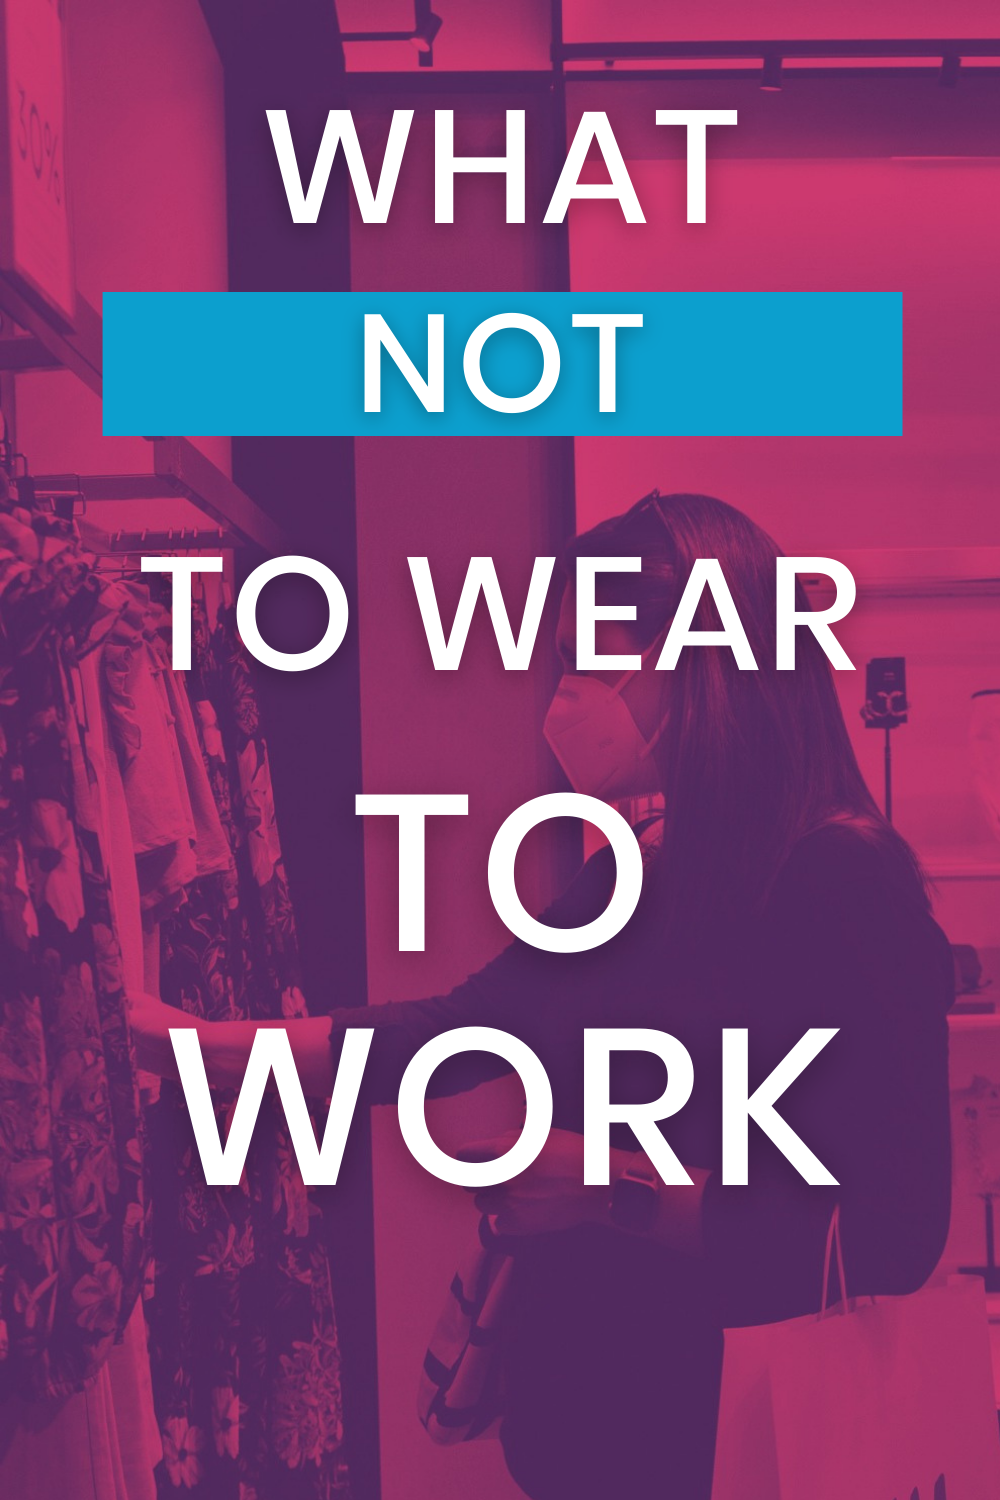 Wondering what not to wear to work since fashion has been so crazy lately? Prairie dresses, joggers, white sneakers, bodysuits, sweater vests, headbands, and more -- let's discuss. Here are Kat's thoughts on what not to wear to work (both business casual offices and more conservative, formal offices like law offices, banks and courts) -- what are your thoughts?  #corporette #whatnottoweartowork #fashionfauxpas #womenlawyers #businesscasual #conservativeoffice #smartcasual #officedresscodes